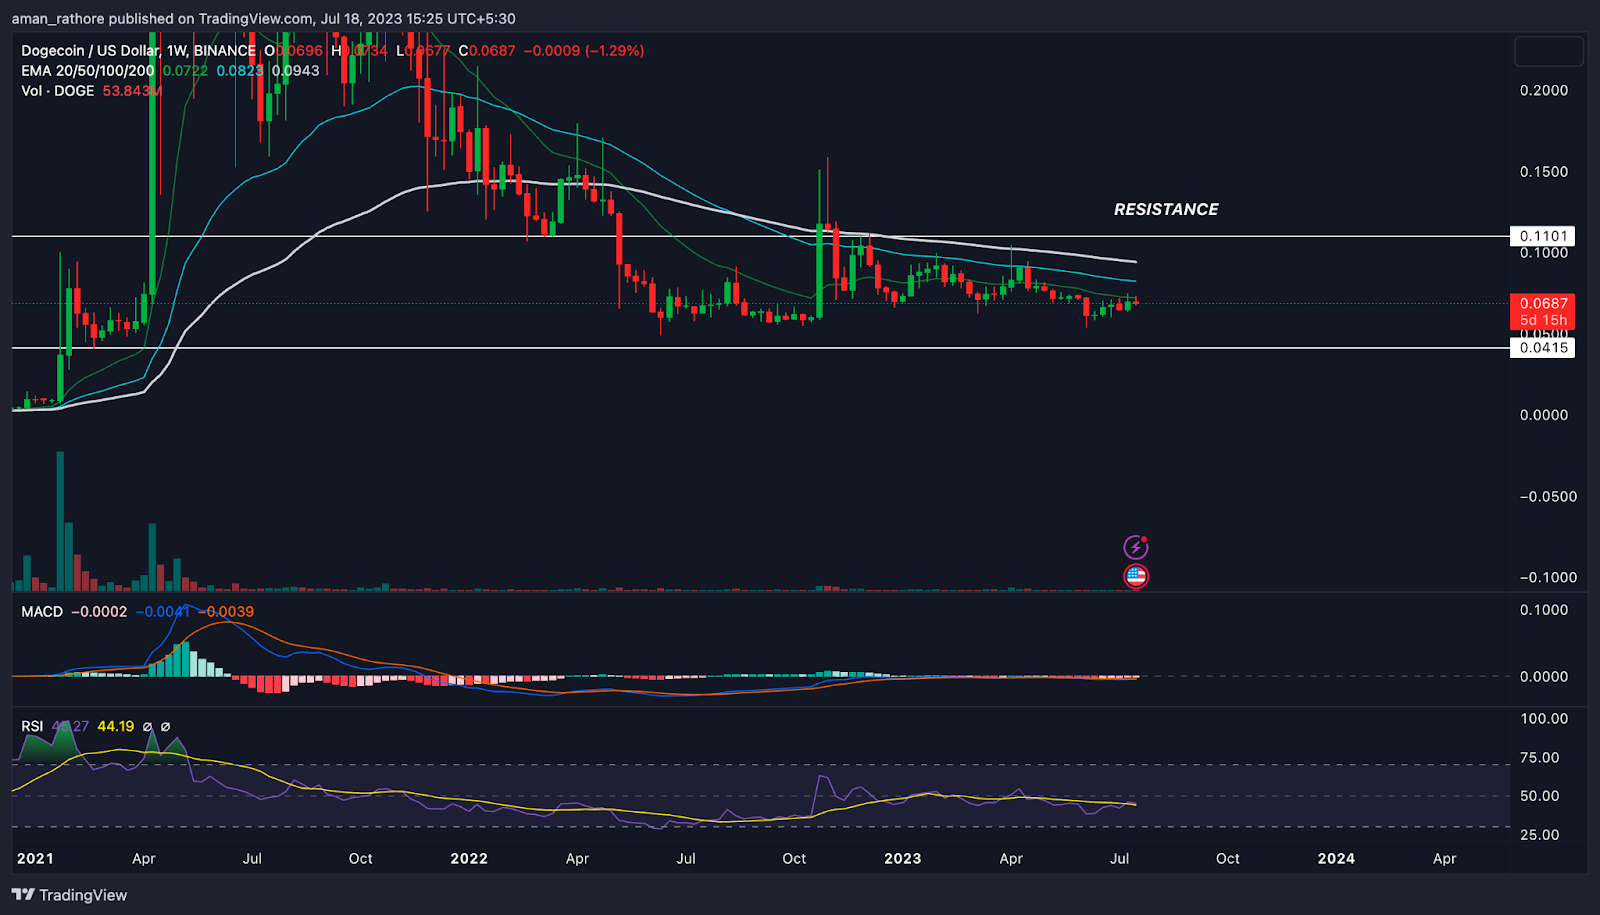 Dogecoin Price Analysis: Will DOGE Coin Rebound From Here?